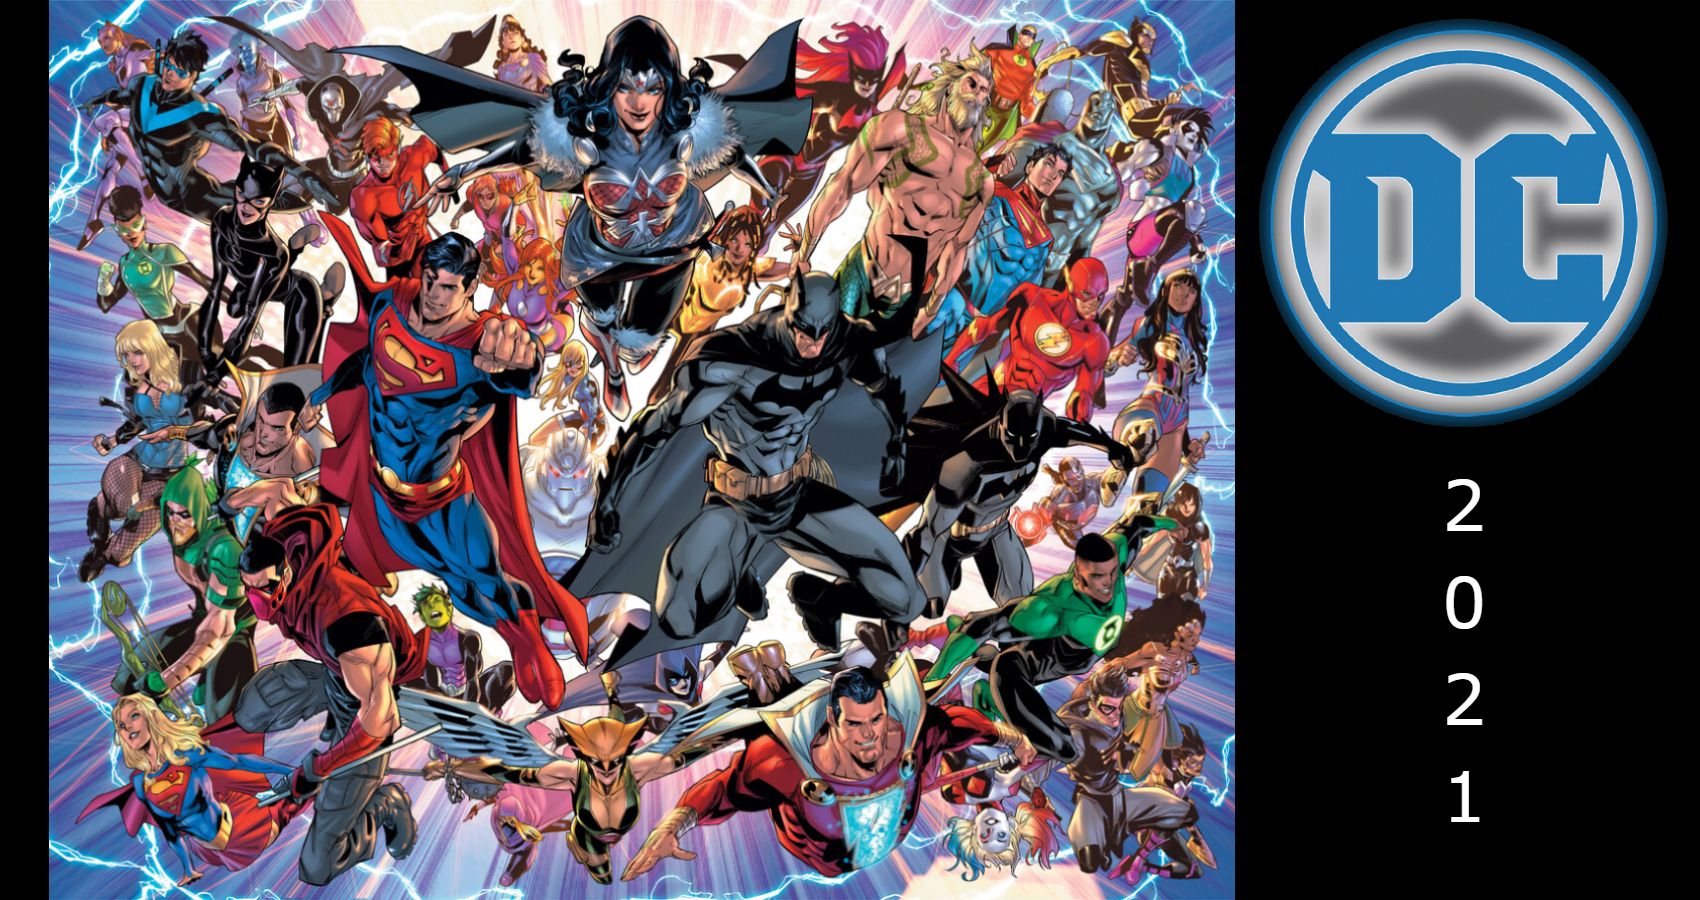 Biggest Changes to DC Comics in 2021